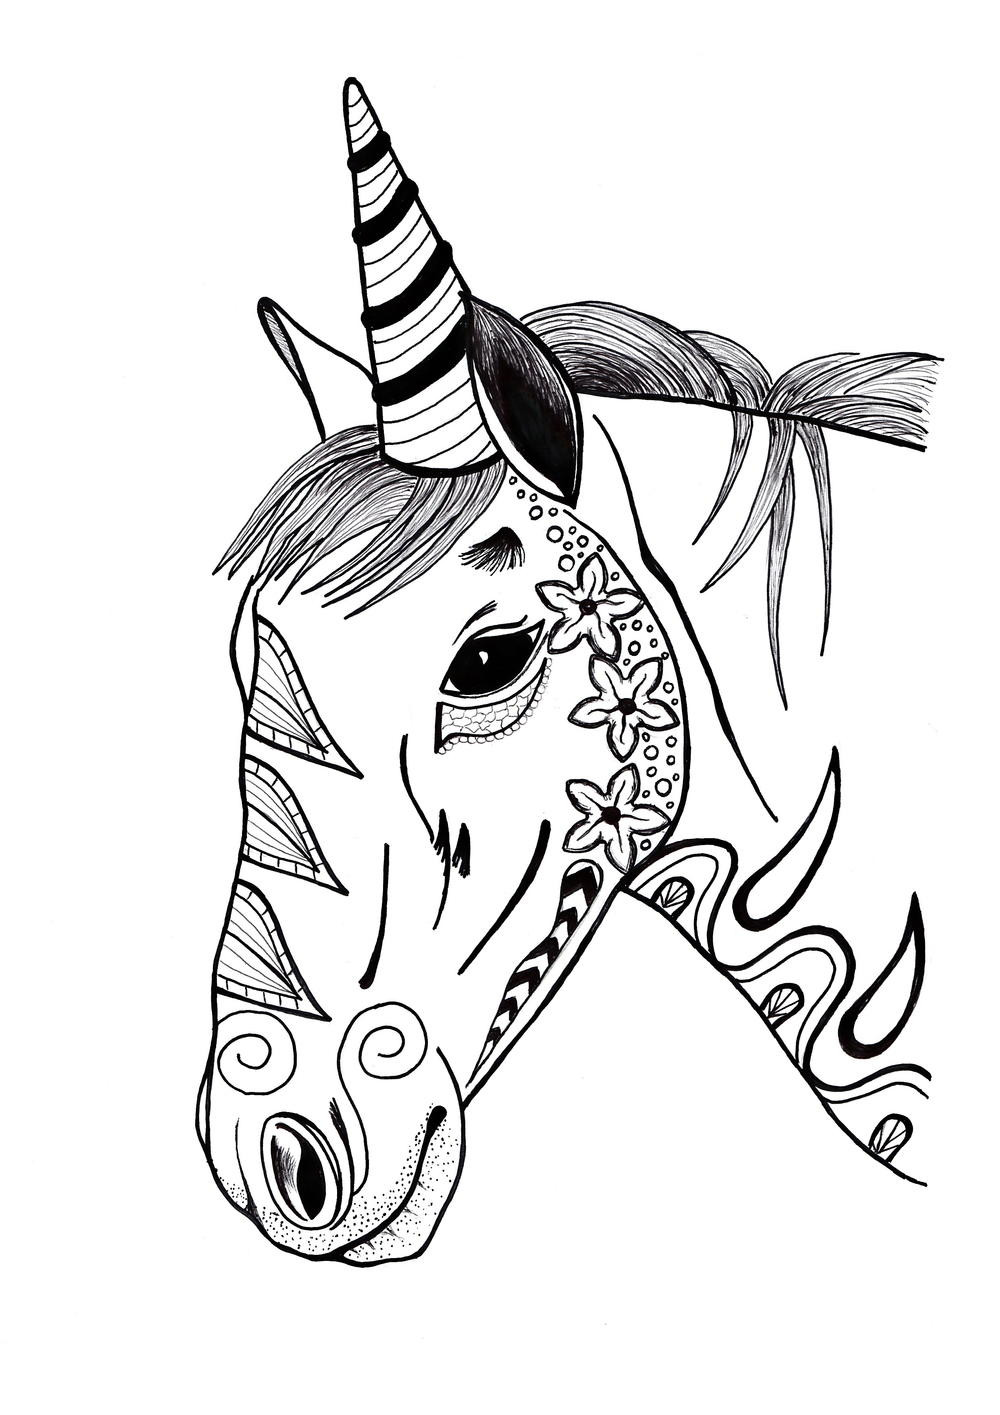 Free Printable Coloring Pages Of Unicorns
 Colorful Unicorn Adult Coloring Page